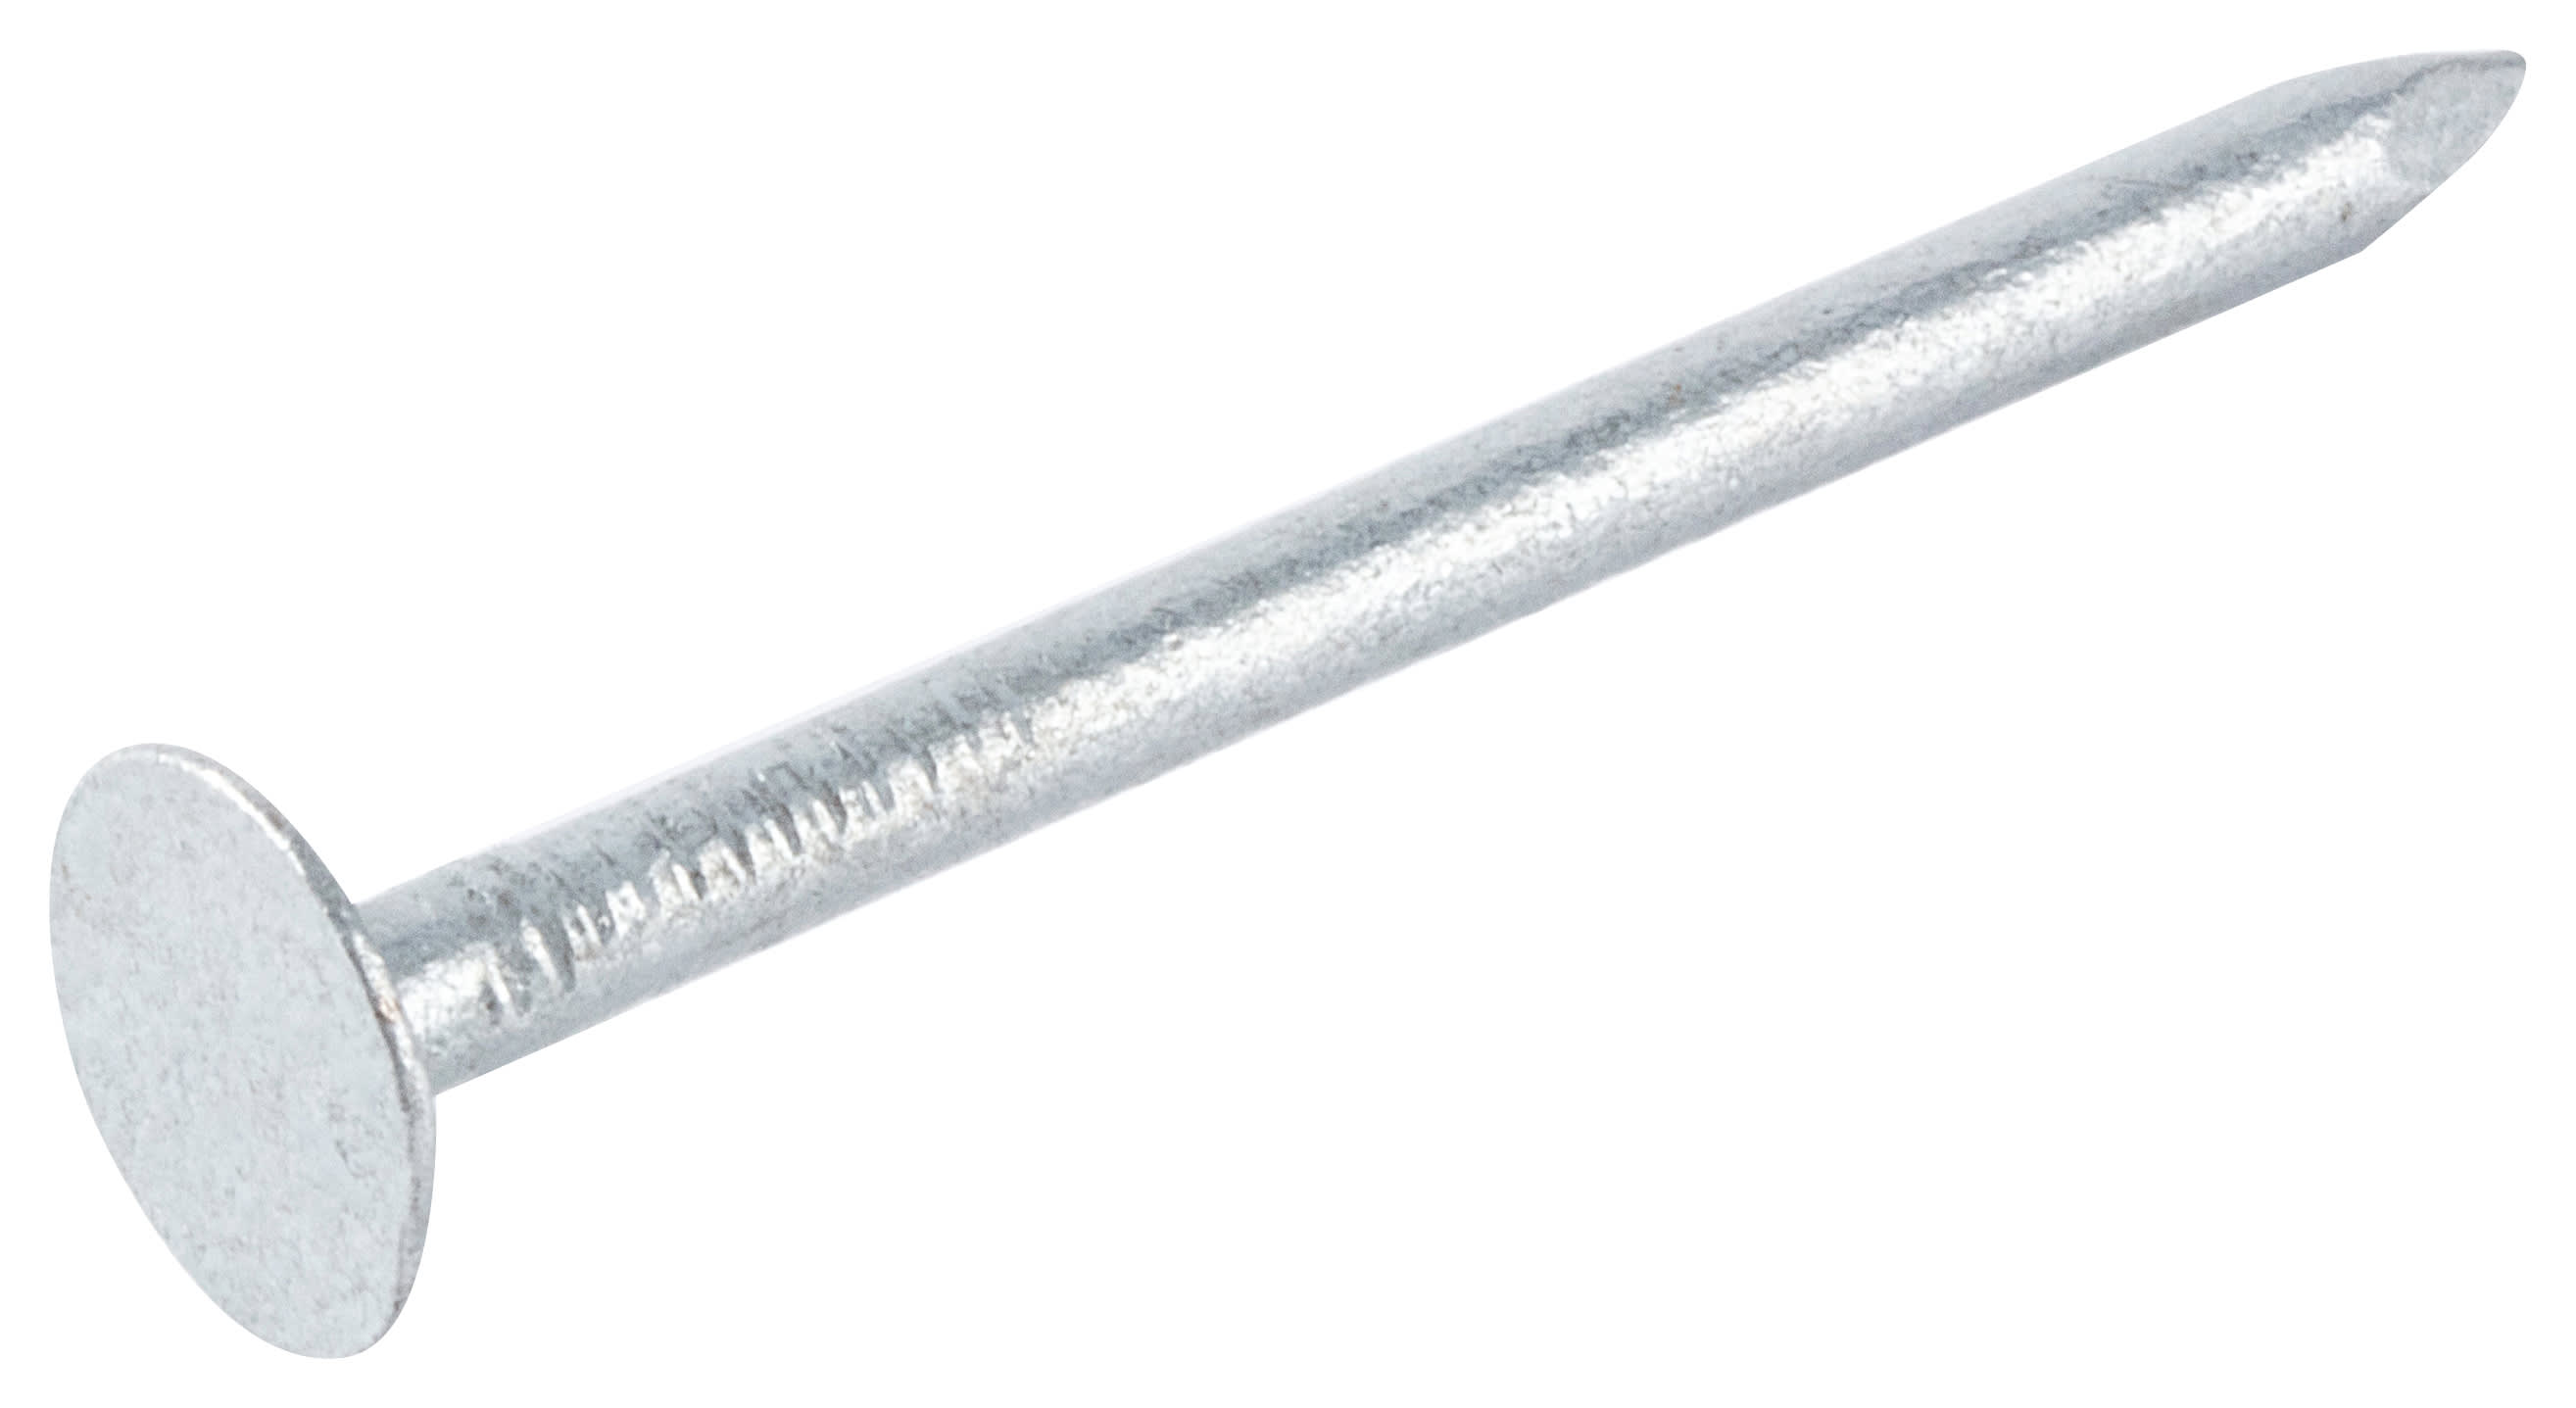 Galvanised Clout Nails - 40 x 2.65mm -